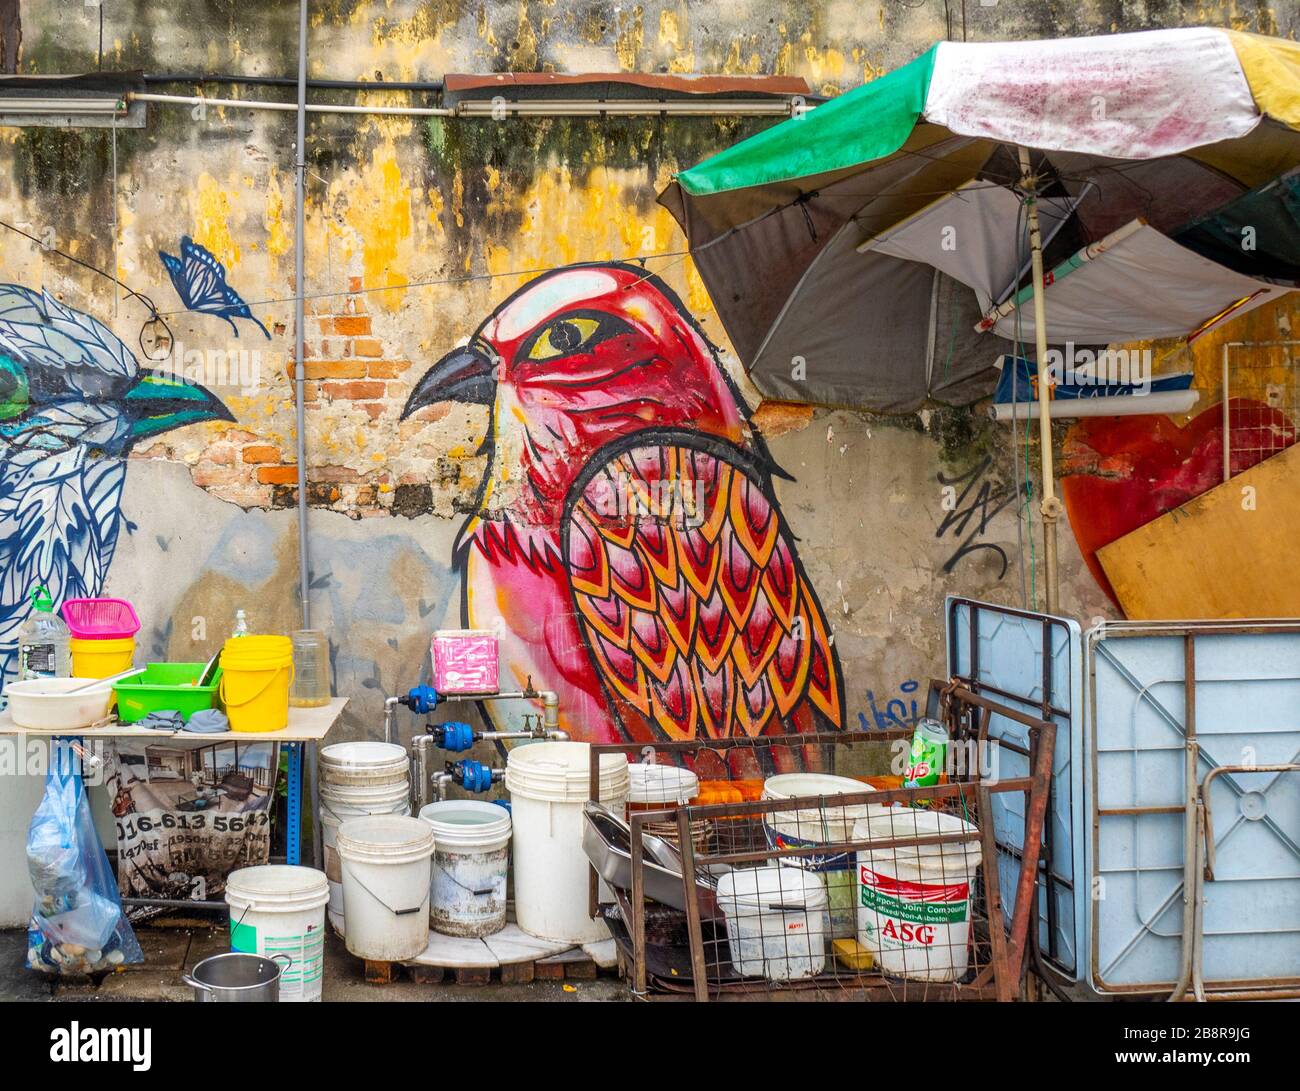 Mural of birds on wall of building and outdoor kitchen of a restaurant in Lorong Panggung laneway Chinatown Kuala Lumpur Malaysia. Stock Photo